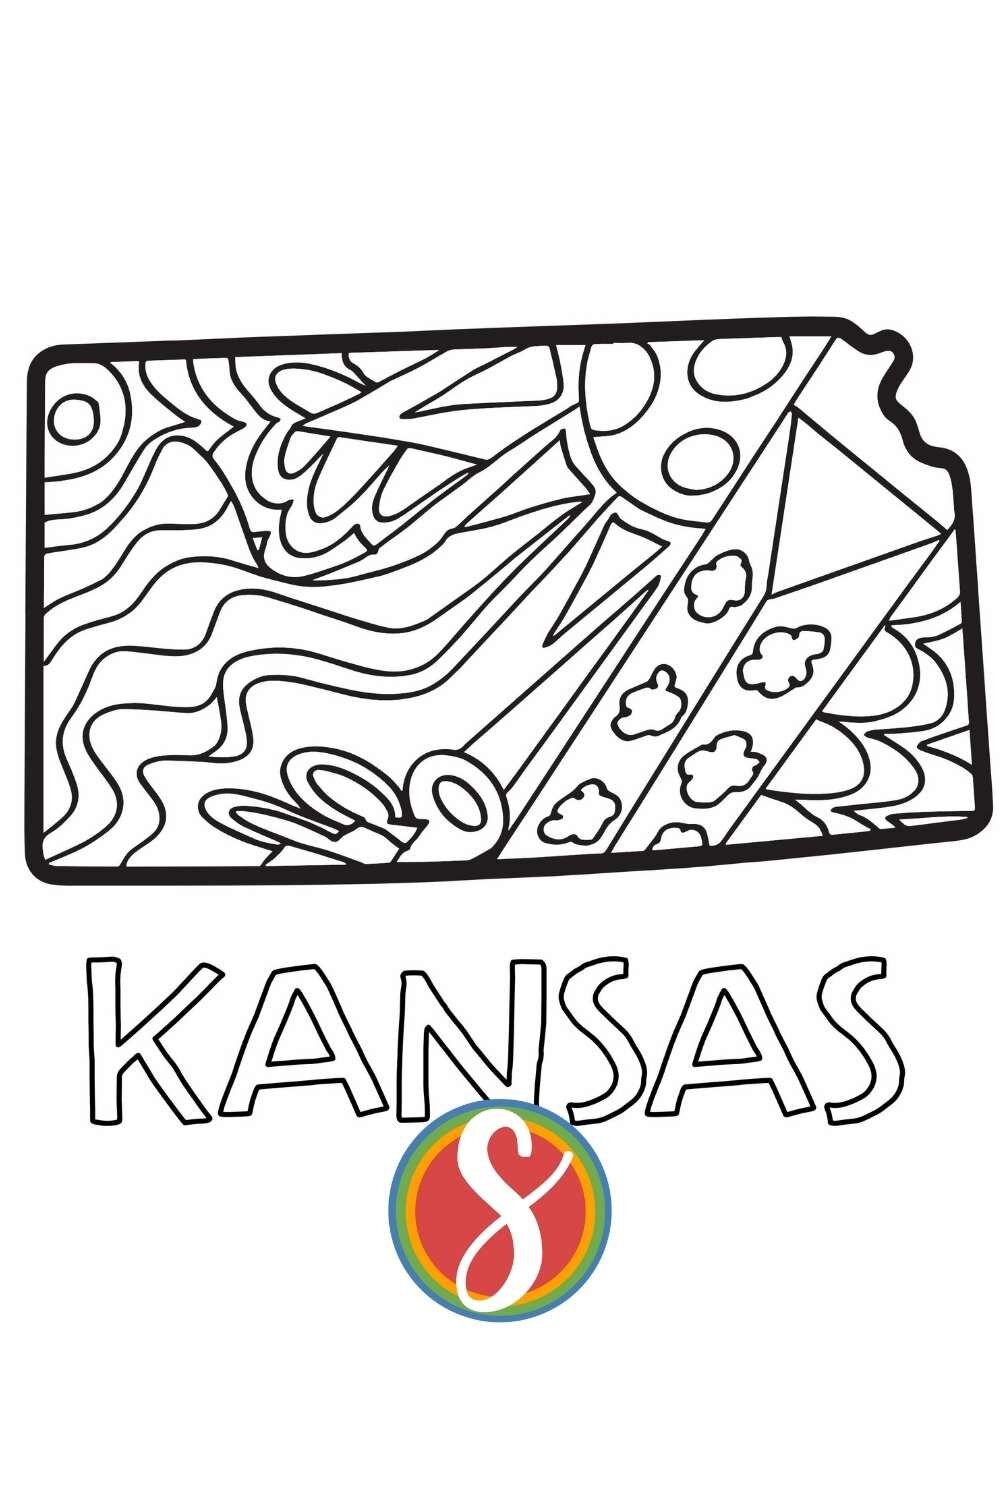 Free printable Kansas coloring page from Stevie Doodles - print and color 4 free Kansasthemed activity pages in this post from Stevie Doodles and find your state too!